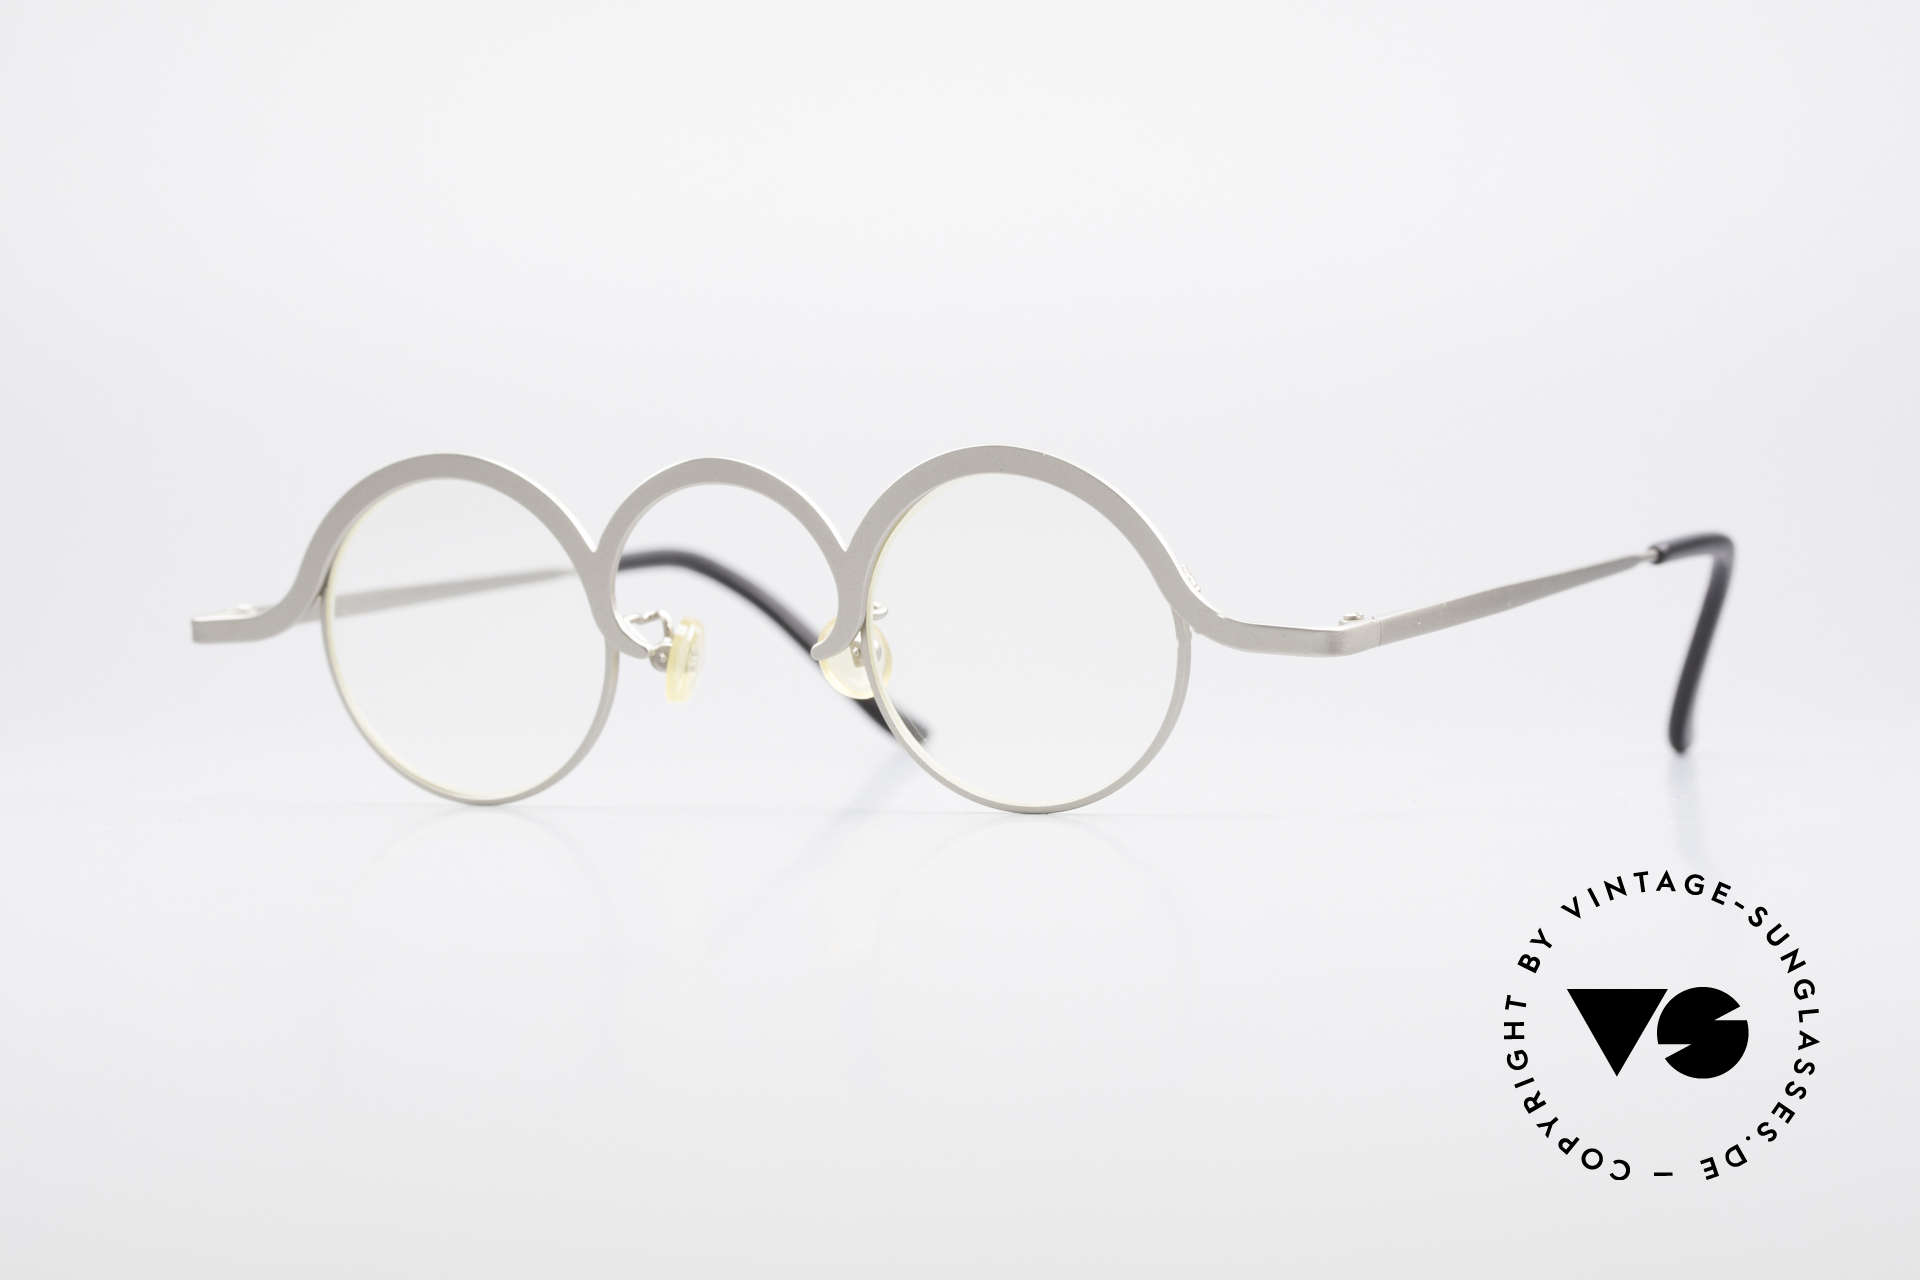 Theo Belgium Jeu Avant-Garde Vintage Specs, Theo Belgium = the most self-willed brand in the world, Made for Men and Women